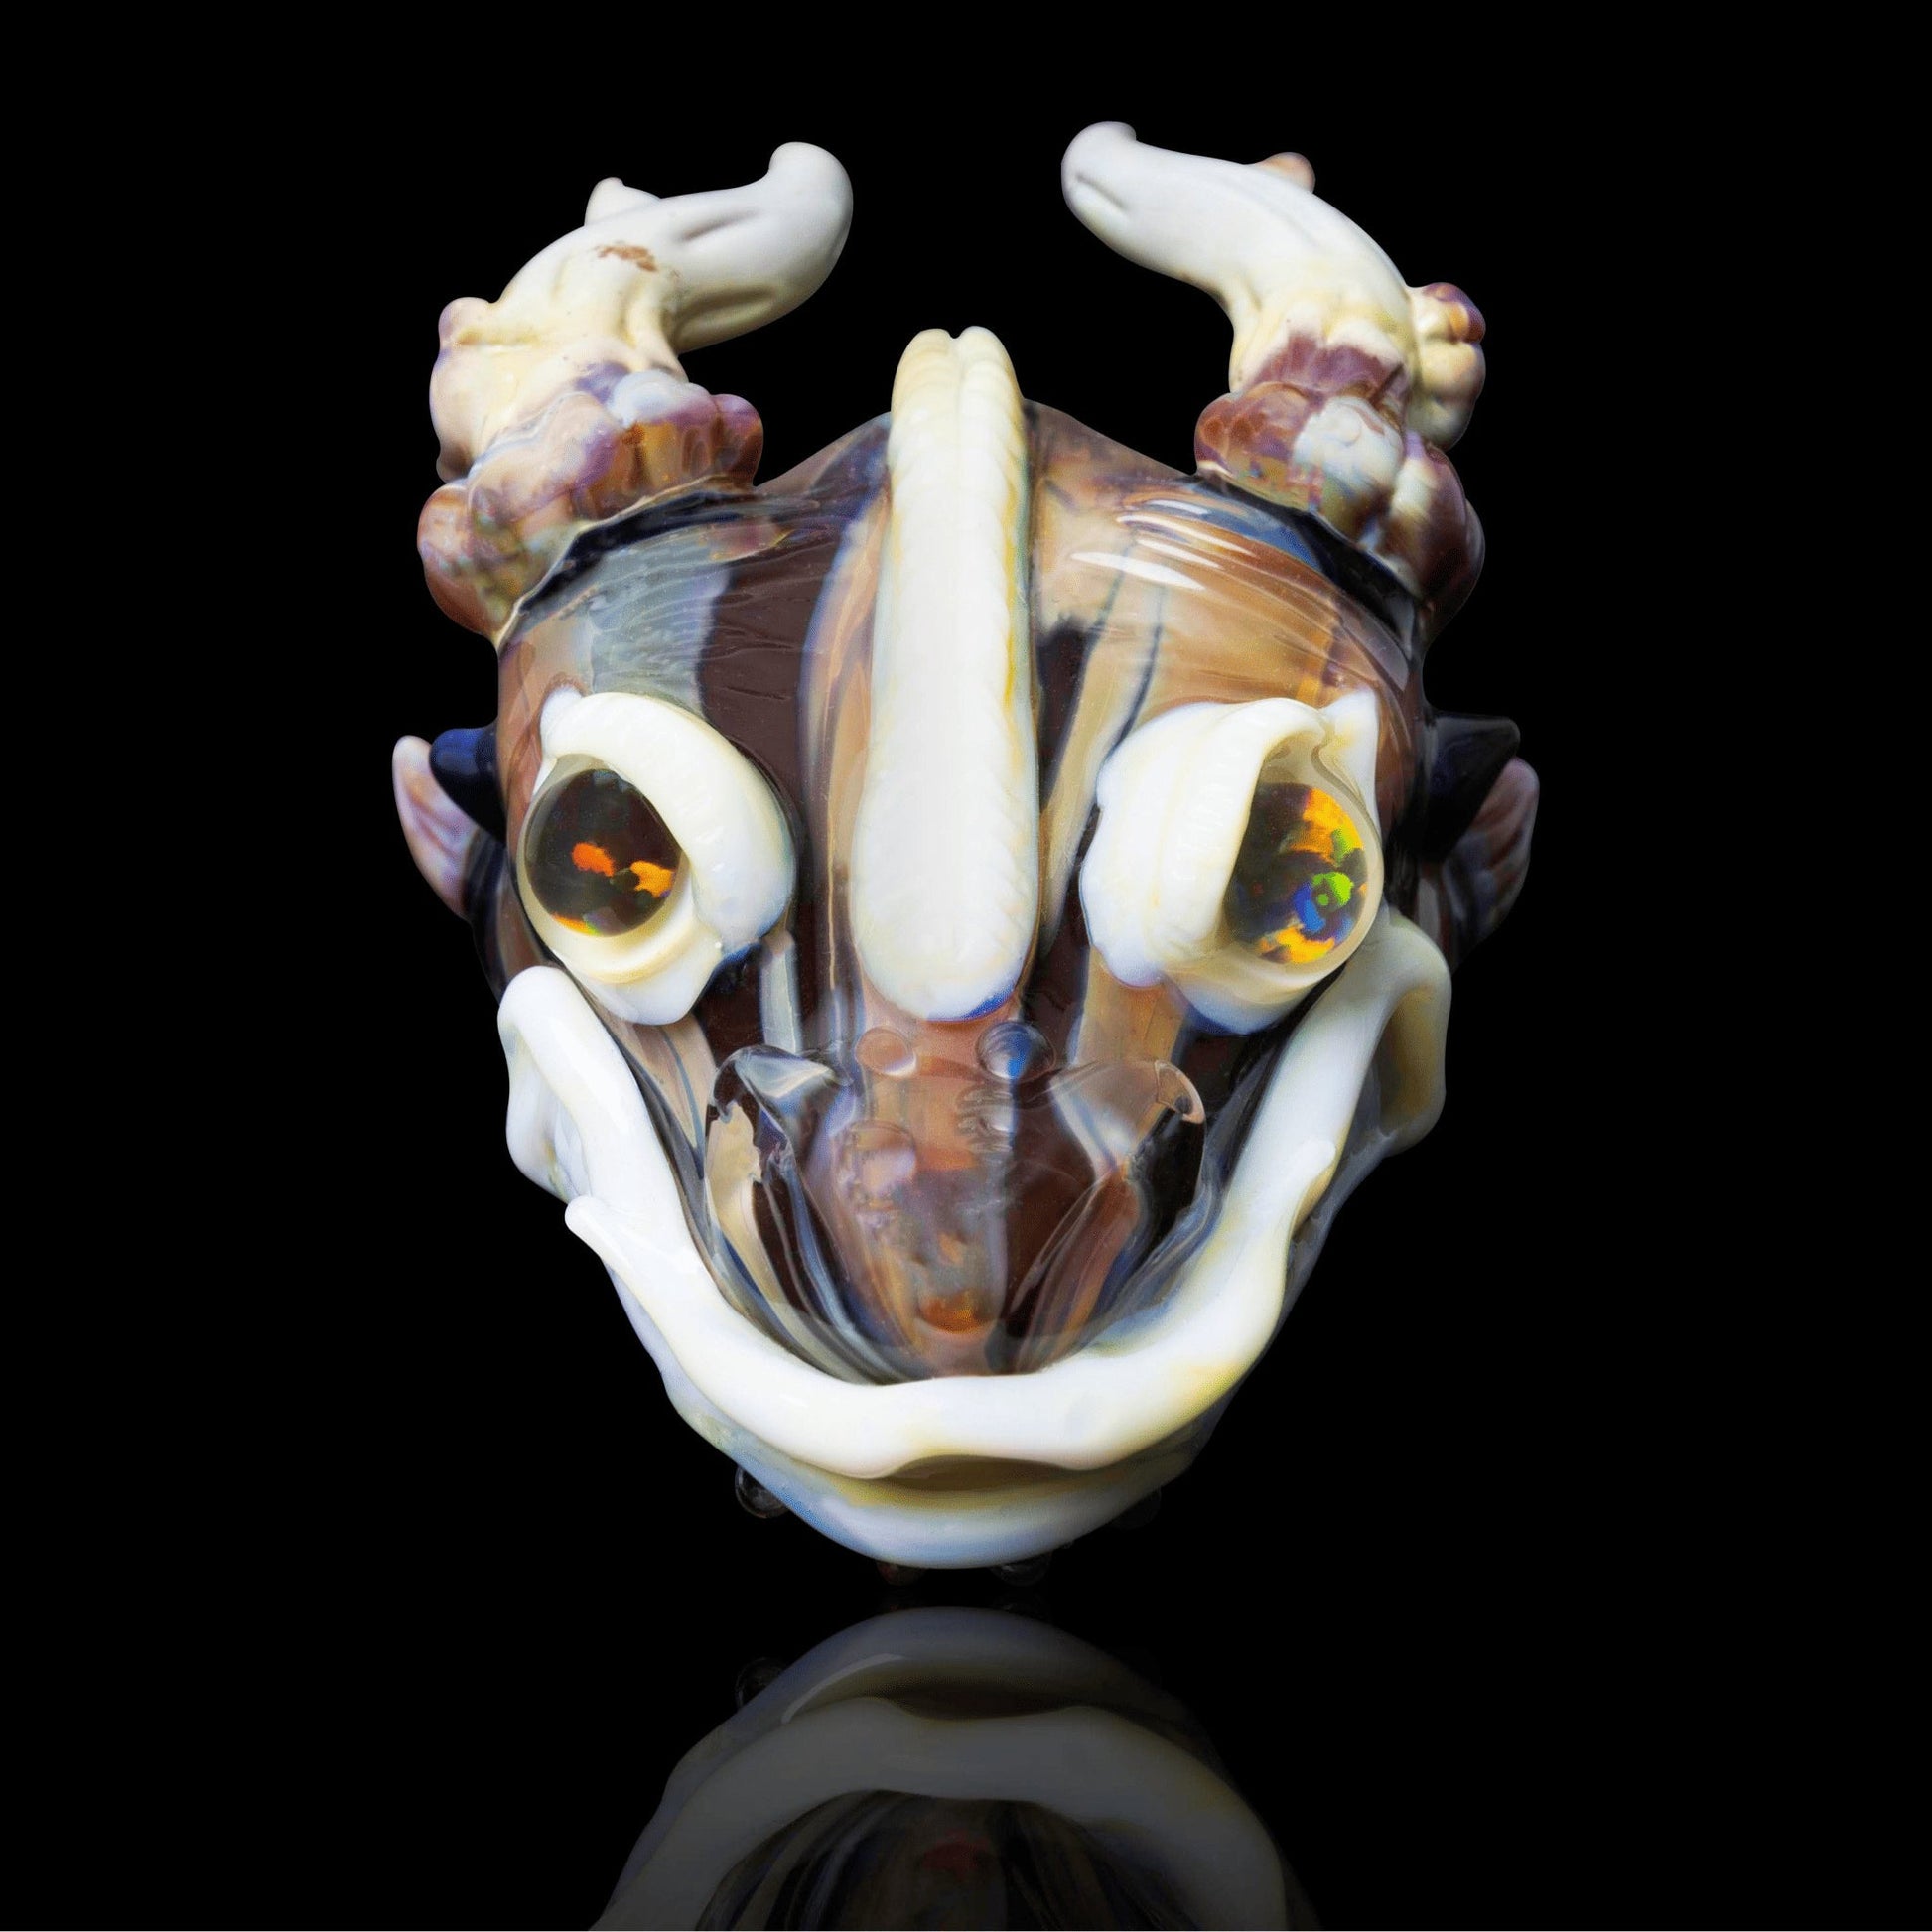 meticulously crafted glass pendant - Dragon Head Pendant by Elks That Run x Nathan Belmont (Belmont’s Beasts)